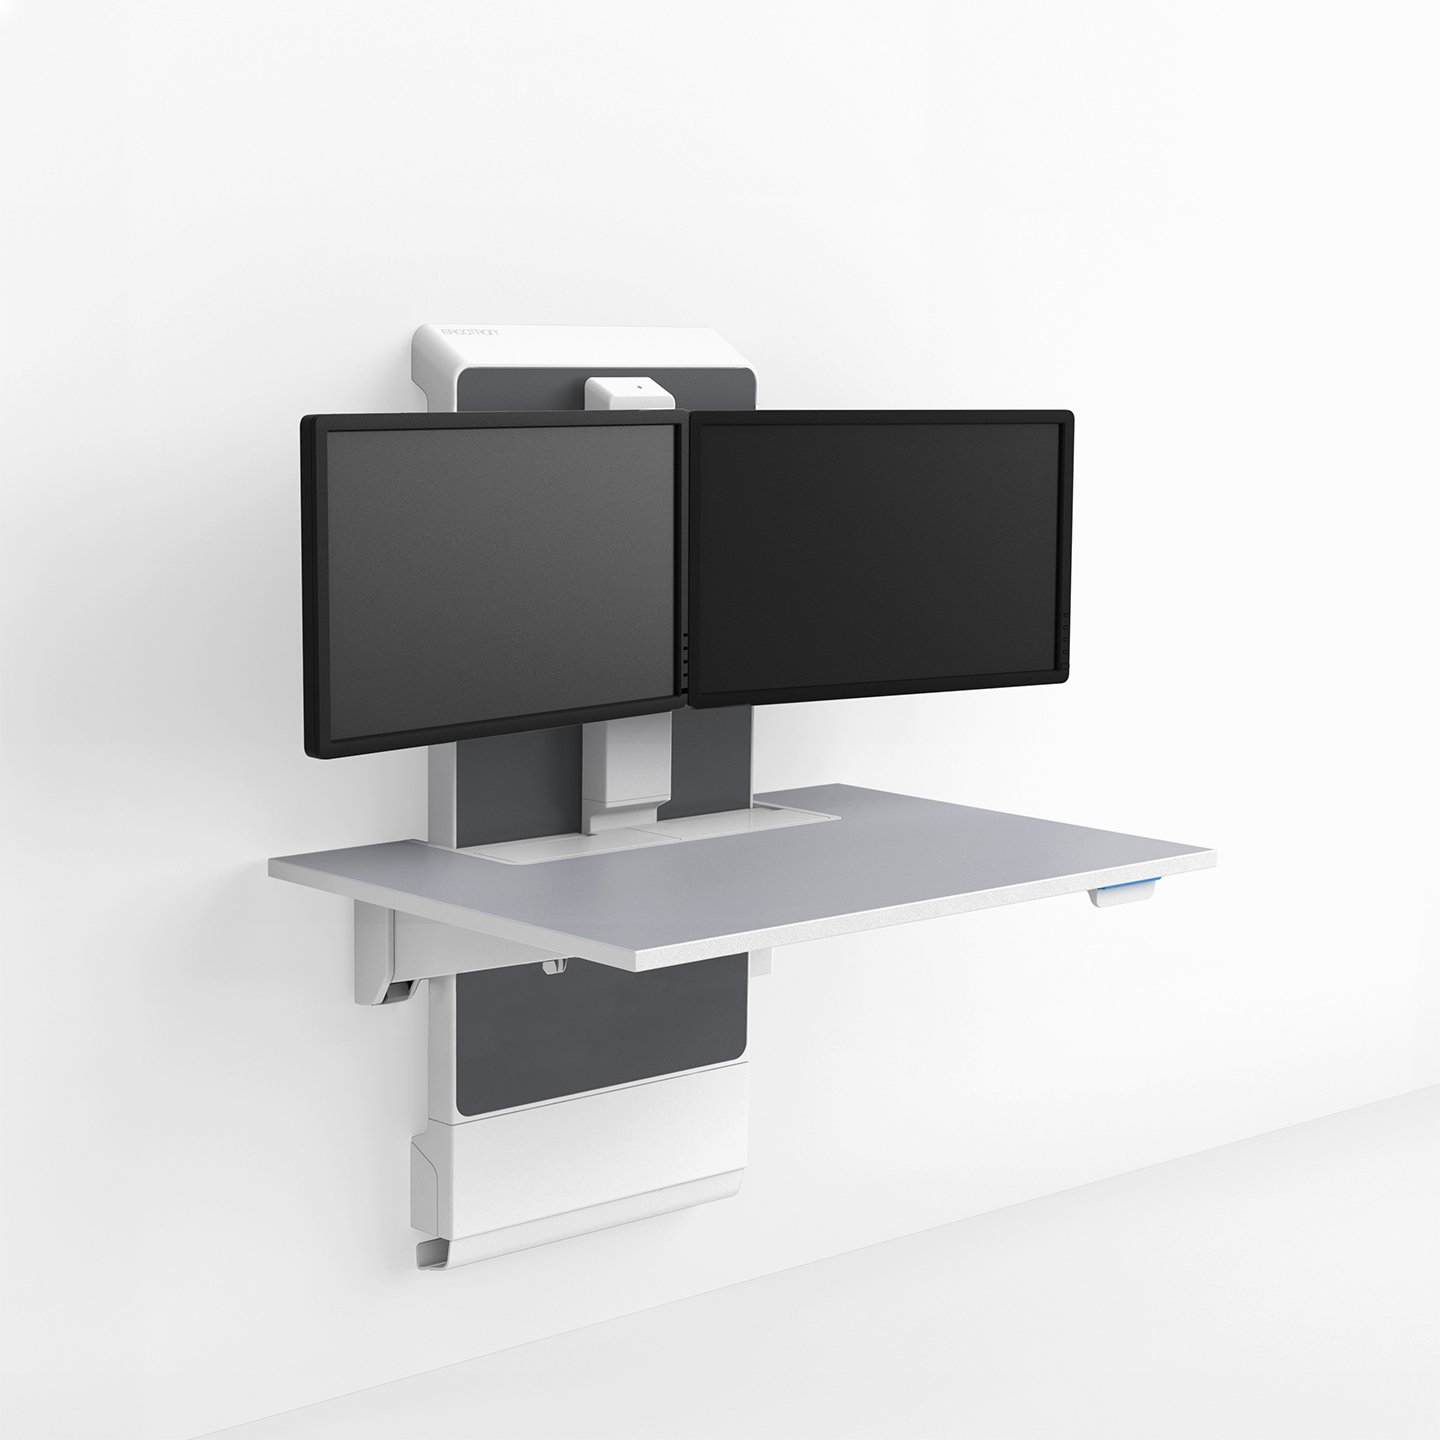 Haworth JUV Wall Workspace wall mount that is unfolded to show monitor and work area